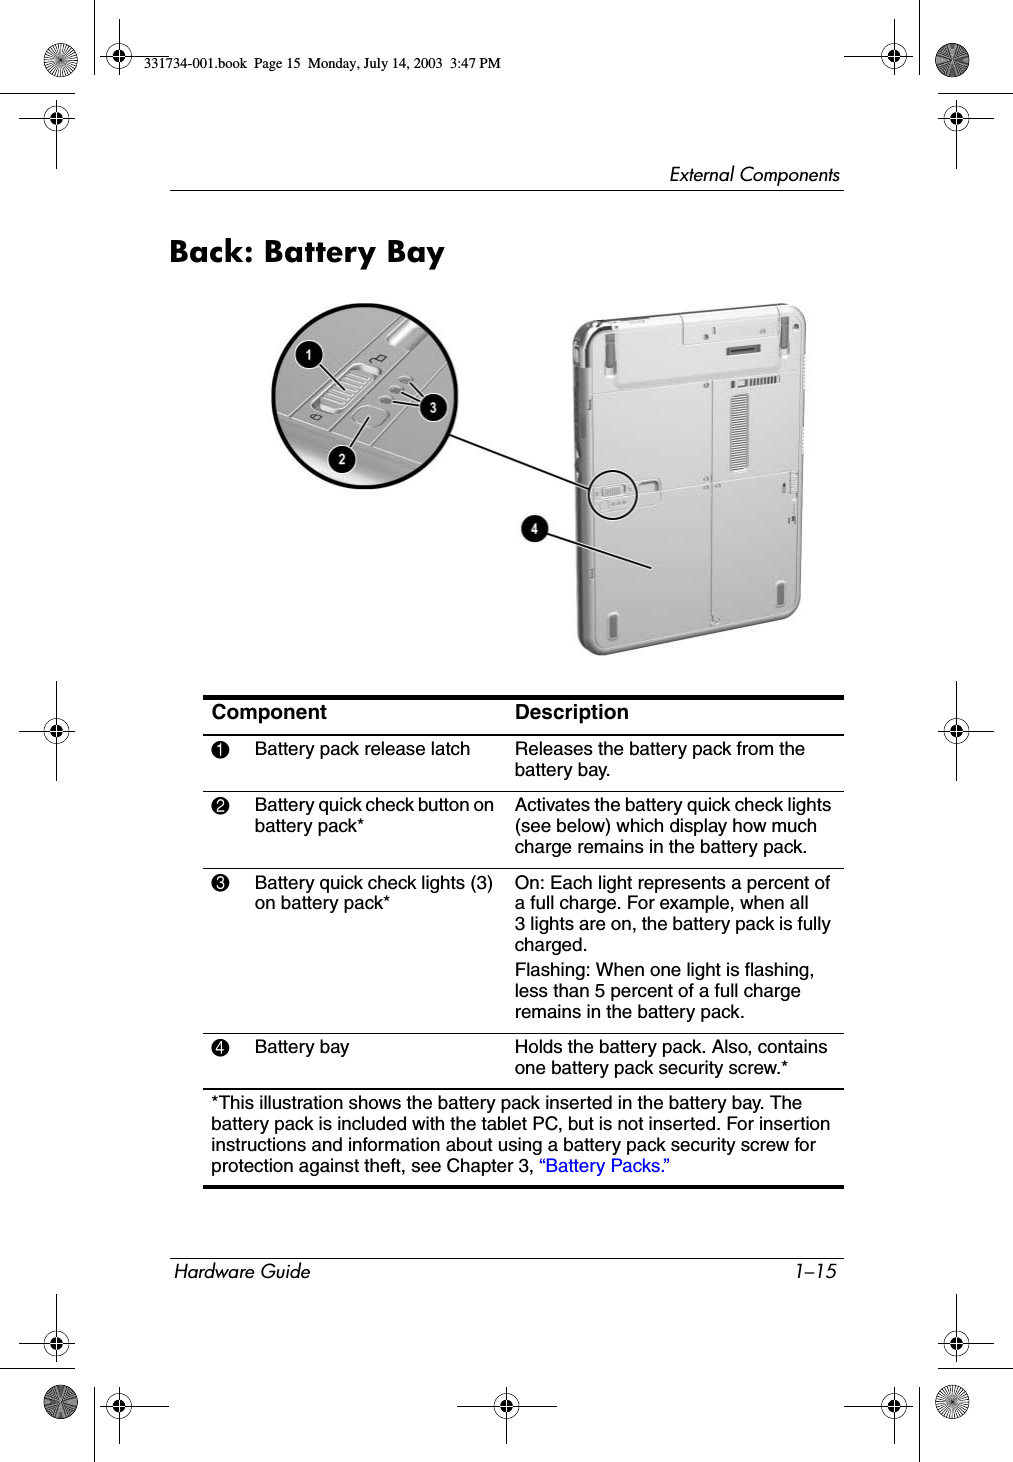 External ComponentsHardware Guide 1–15Back: Battery BayComponent Description1Battery pack release latch Releases the battery pack from the battery bay.2Battery quick check button on battery pack*Activates the battery quick check lights (see below) which display how much charge remains in the battery pack.3Battery quick check lights (3) on battery pack*On: Each light represents a percent of a full charge. For example, when all 3 lights are on, the battery pack is fully charged.Flashing: When one light is flashing, less than 5 percent of a full charge remains in the battery pack.4Battery bay Holds the battery pack. Also, contains one battery pack security screw.**This illustration shows the battery pack inserted in the battery bay. The battery pack is included with the tablet PC, but is not inserted. For insertion instructions and information about using a battery pack security screw for protection against theft, see Chapter 3, “Battery Packs.”331734-001.book  Page 15  Monday, July 14, 2003  3:47 PM